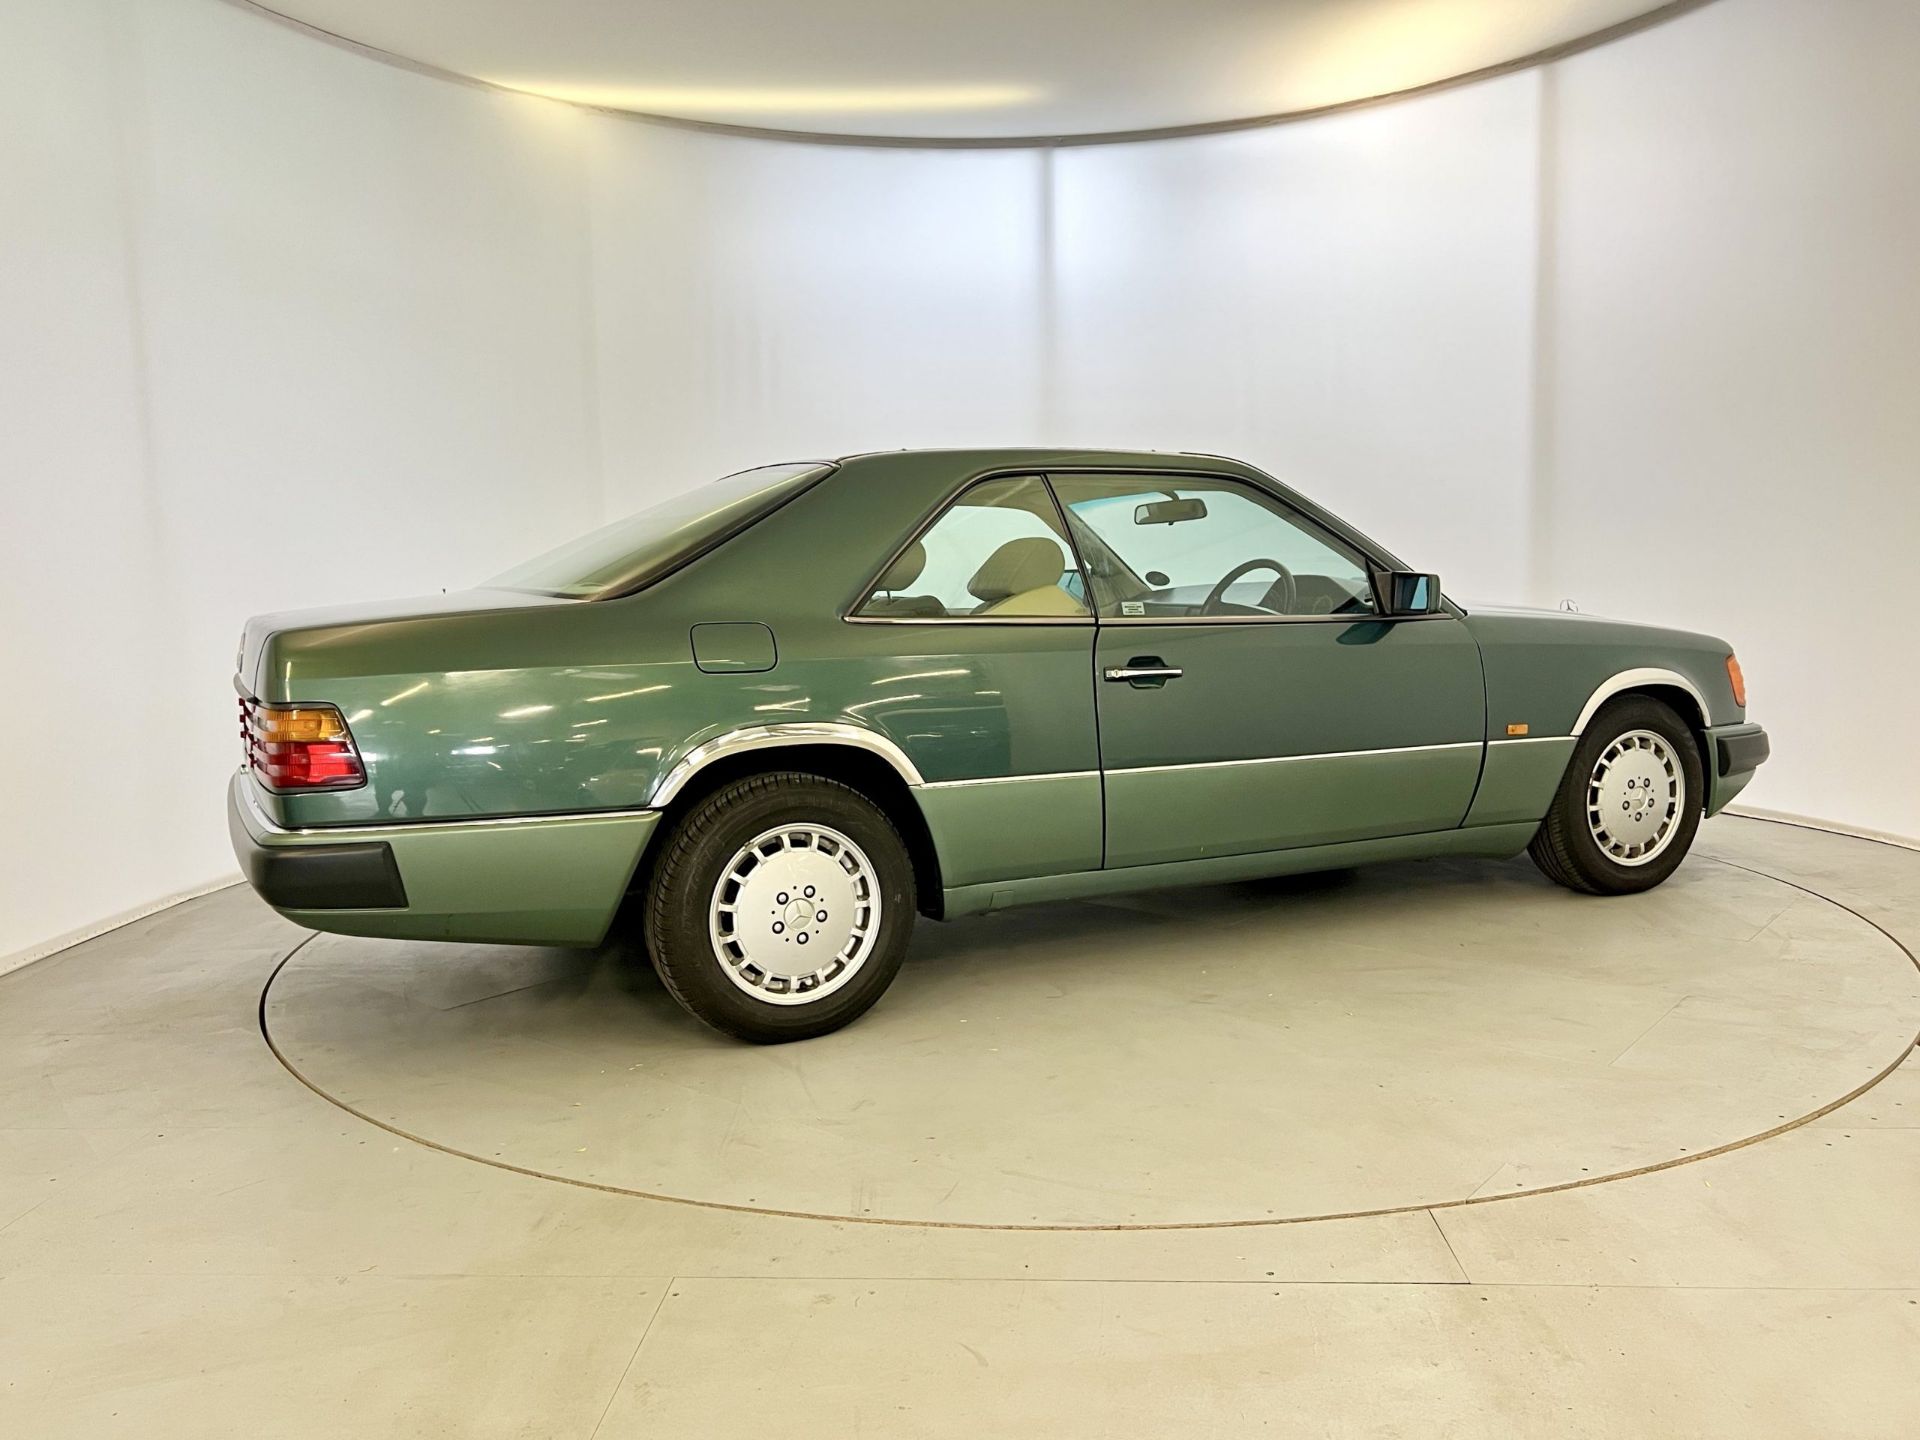 Mercedes 300CE - Image 10 of 30